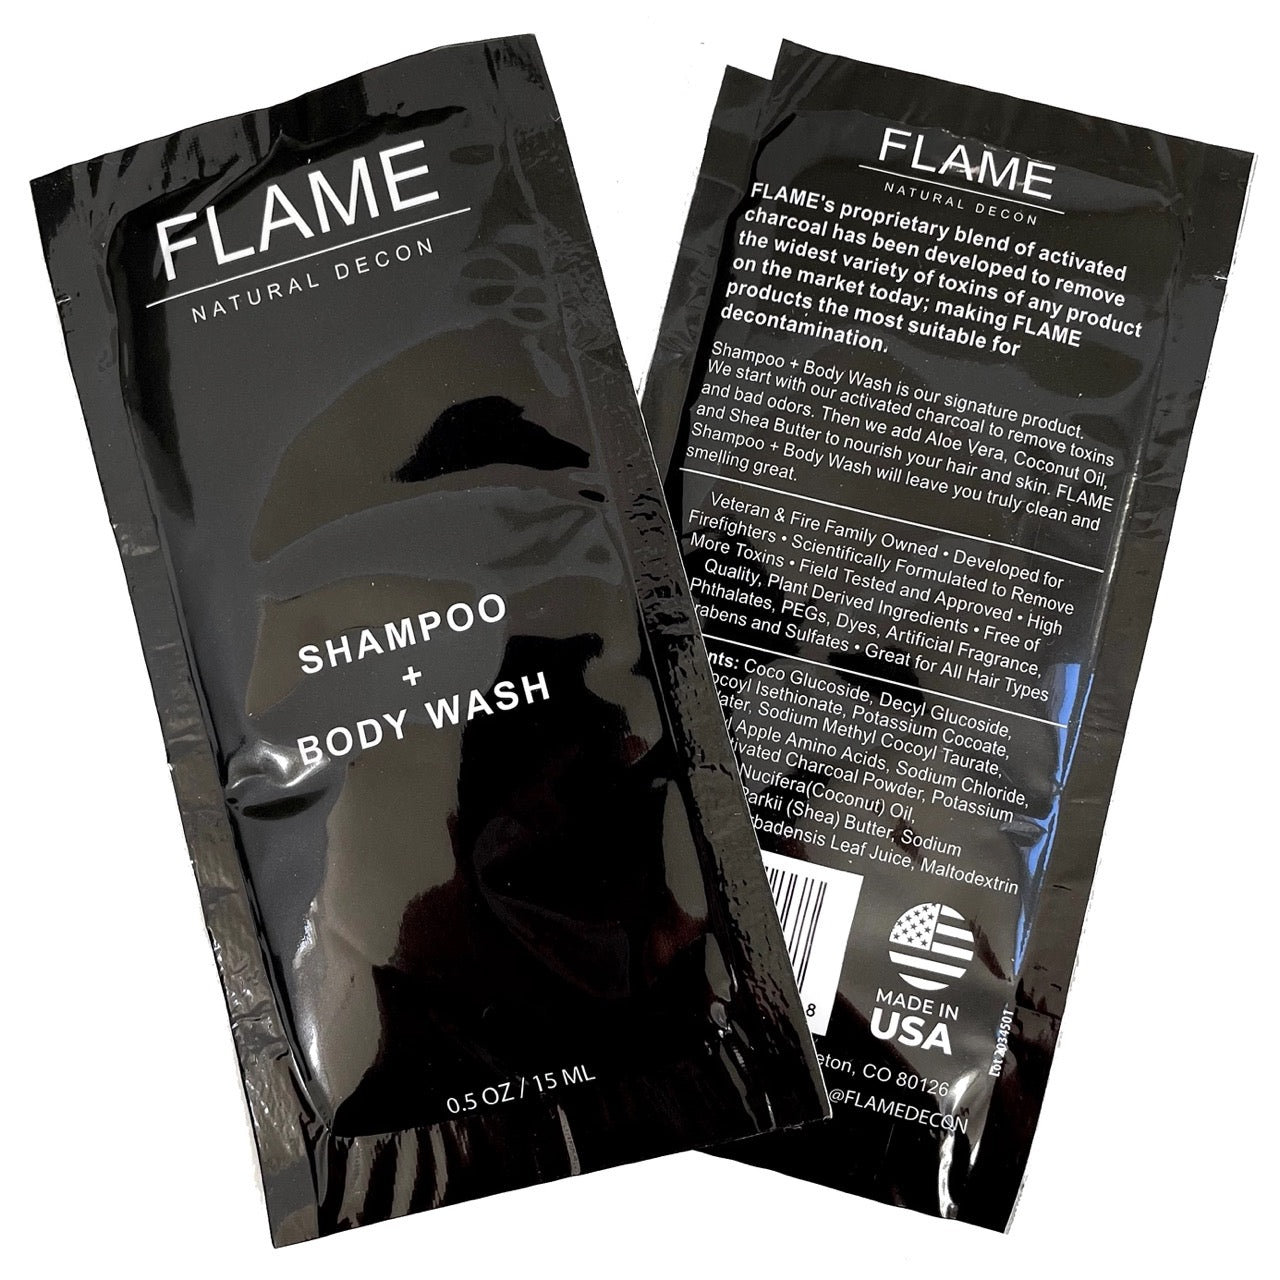 Donation Purchase: FLAME Decon Products for Firefighters in Disaster Areas